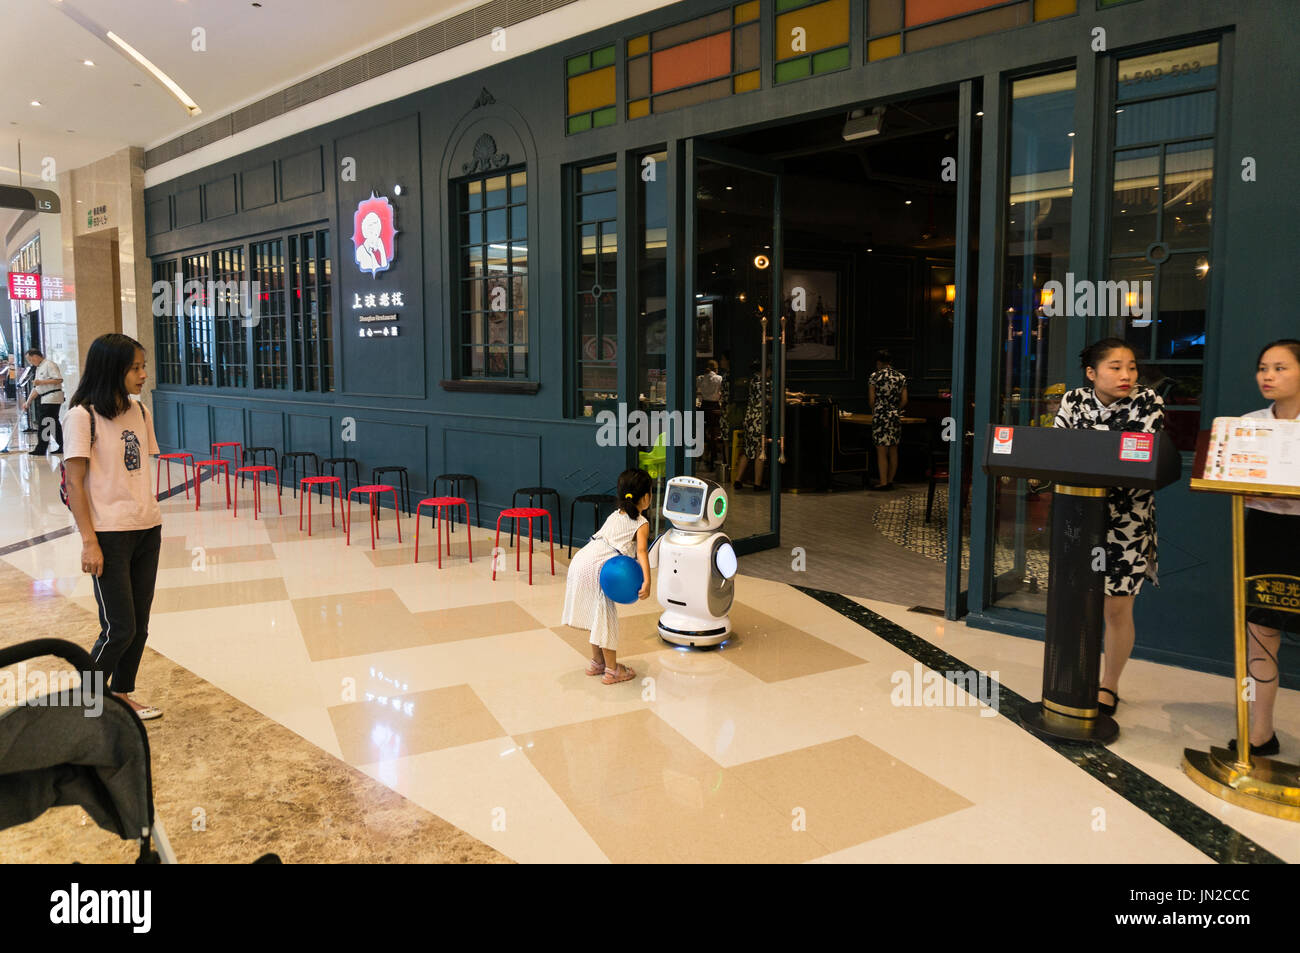 Young child curious about robot in front of restaurant in Shenzhen, China Stock Photo